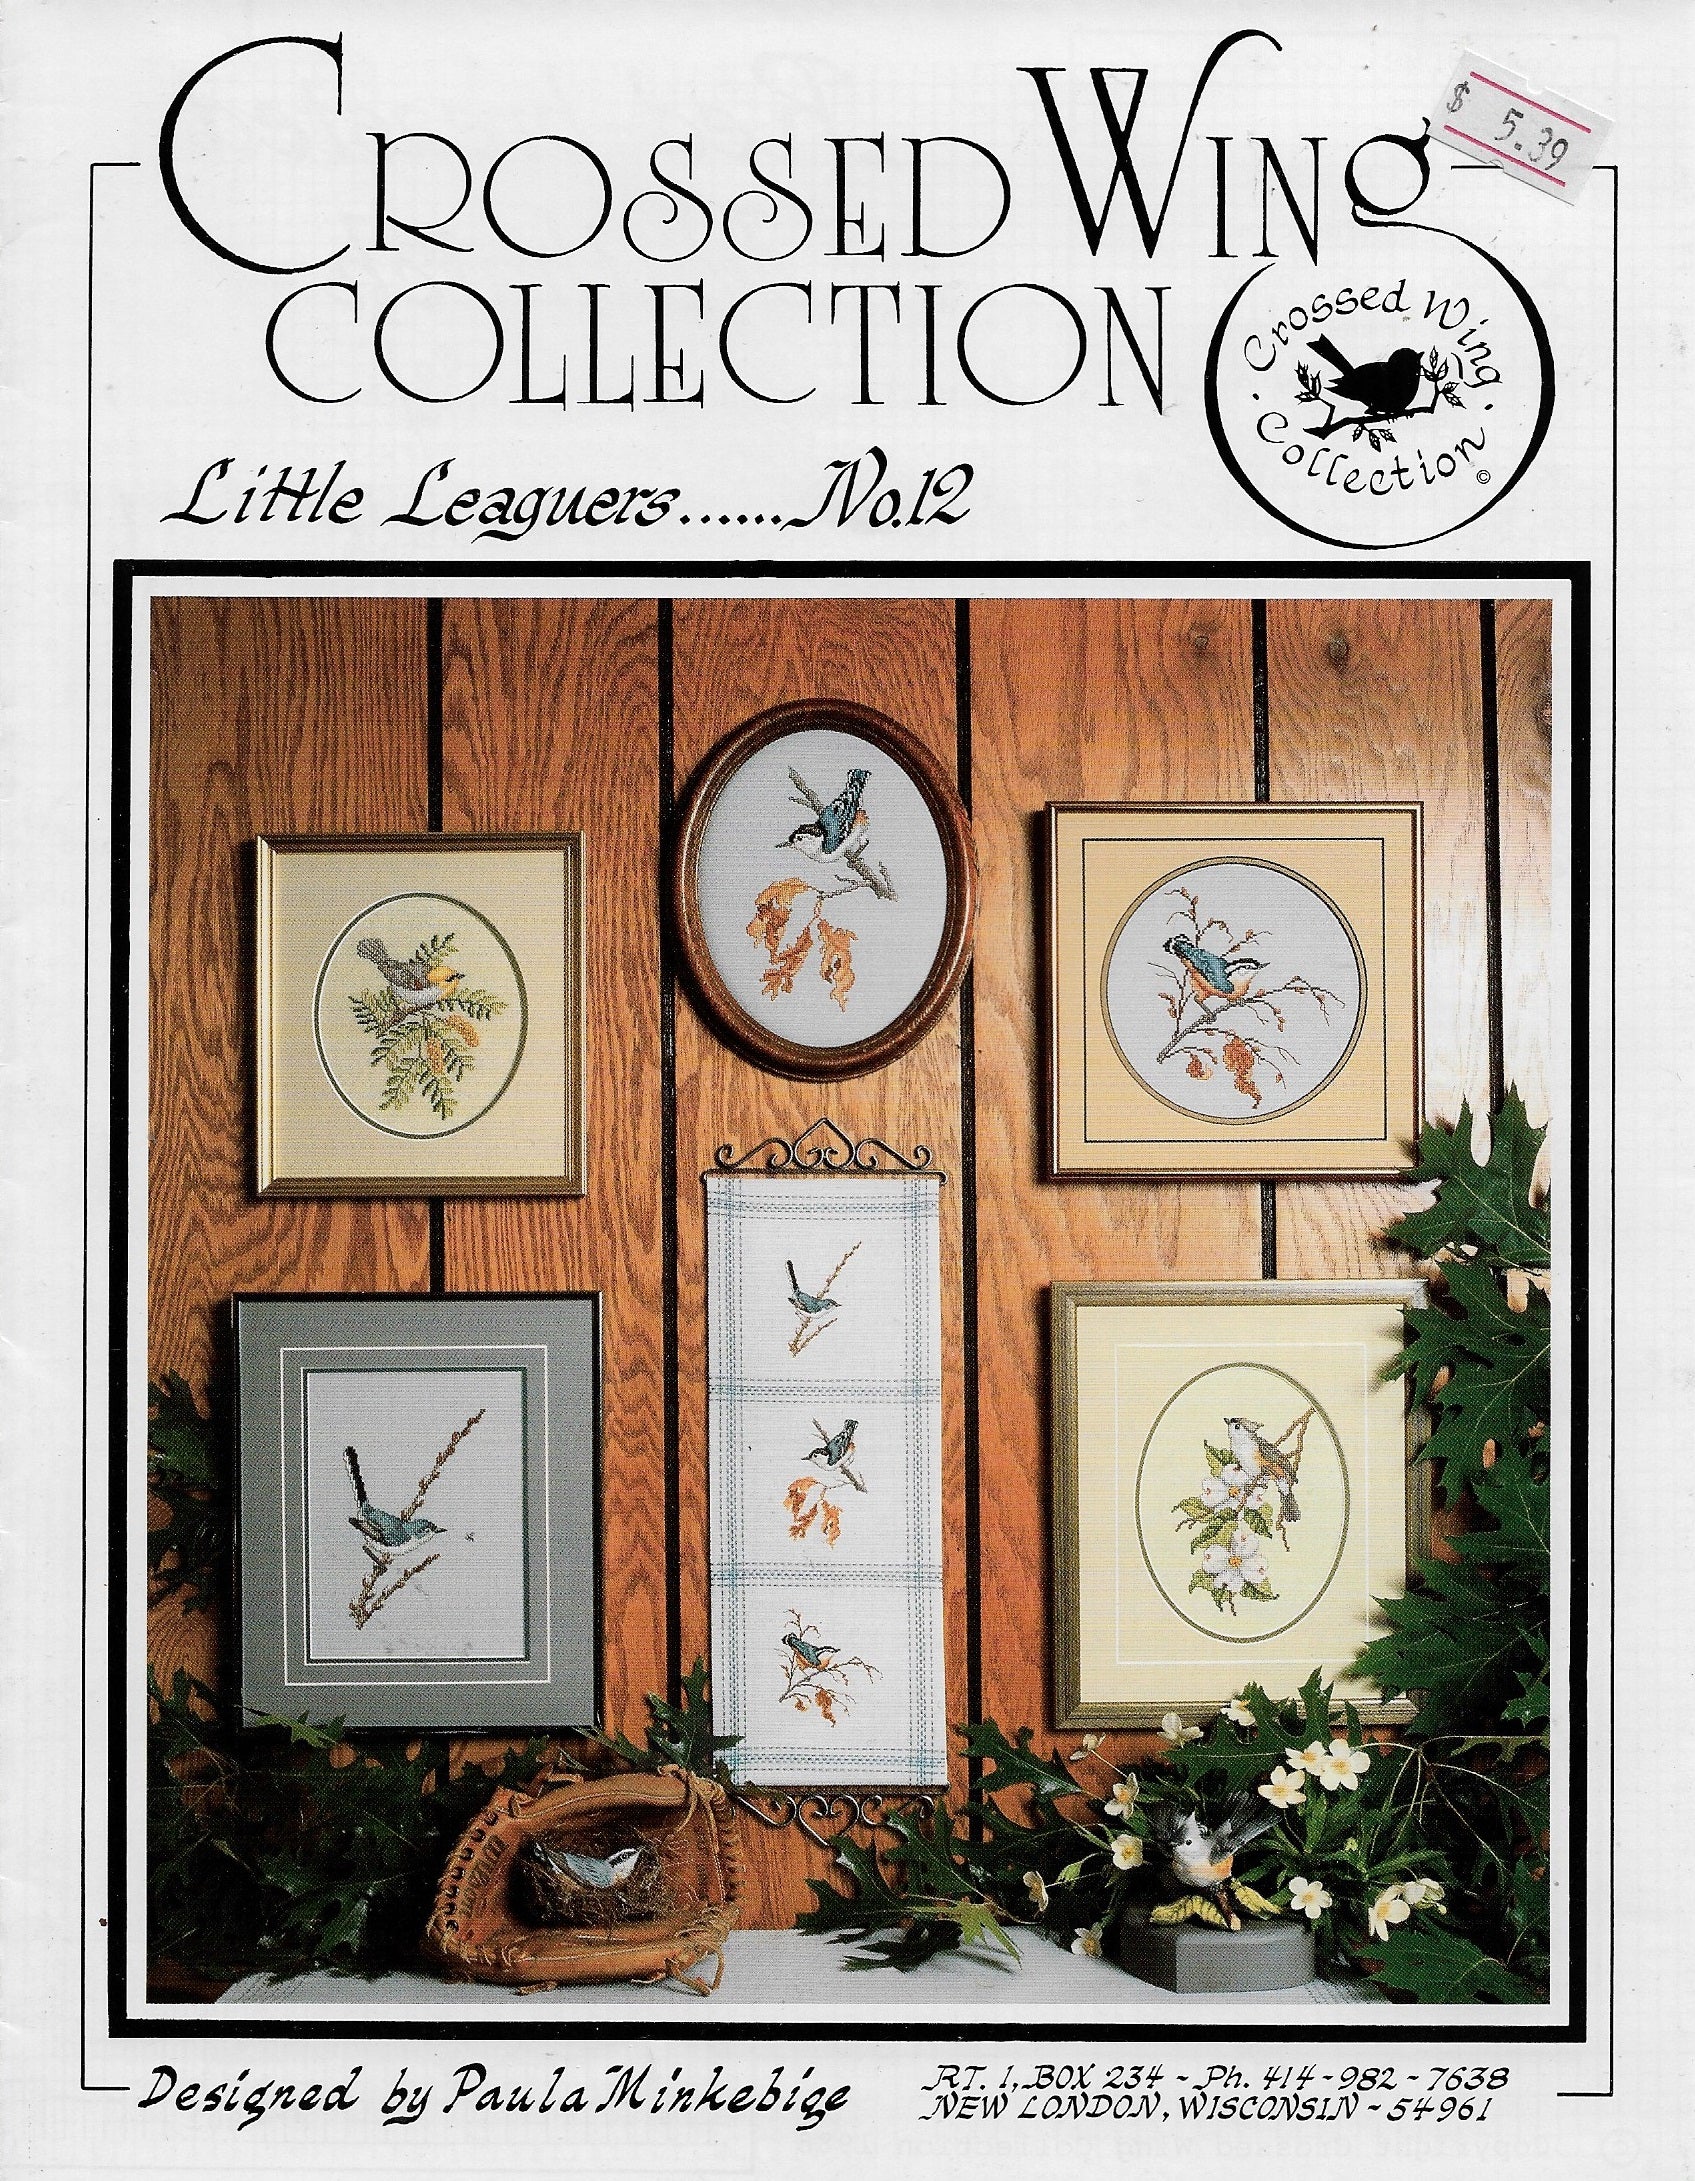 Crossed Wing Collection Little Leaguers 12 bird cross stitch pattern